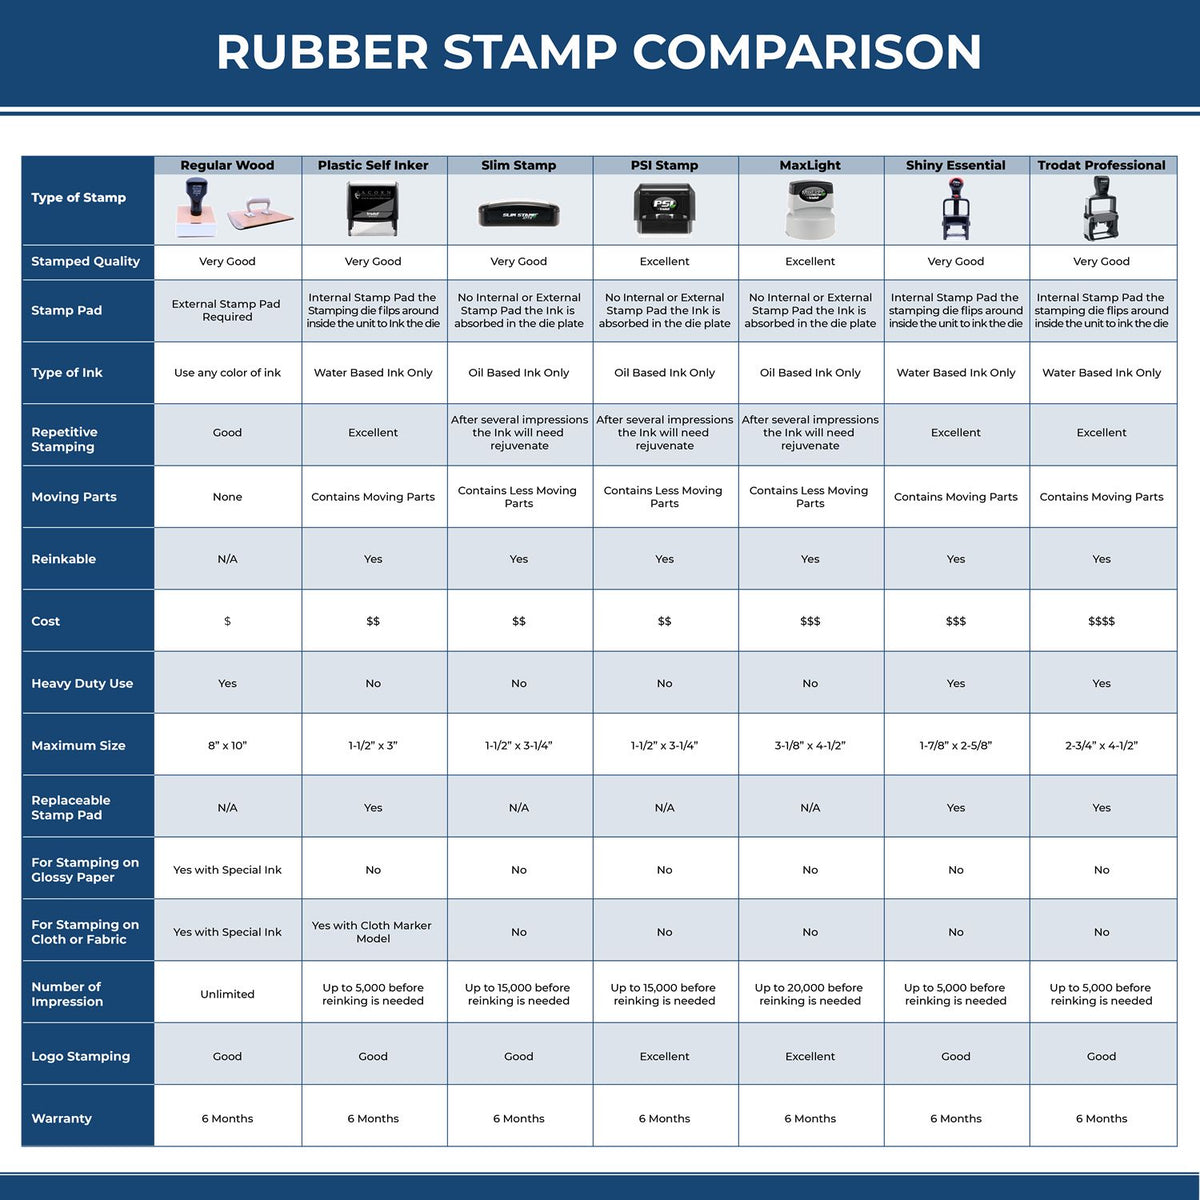 A comparison chart for the different types of mount models available for the Super Slim Virginia Notary Public Stamp.